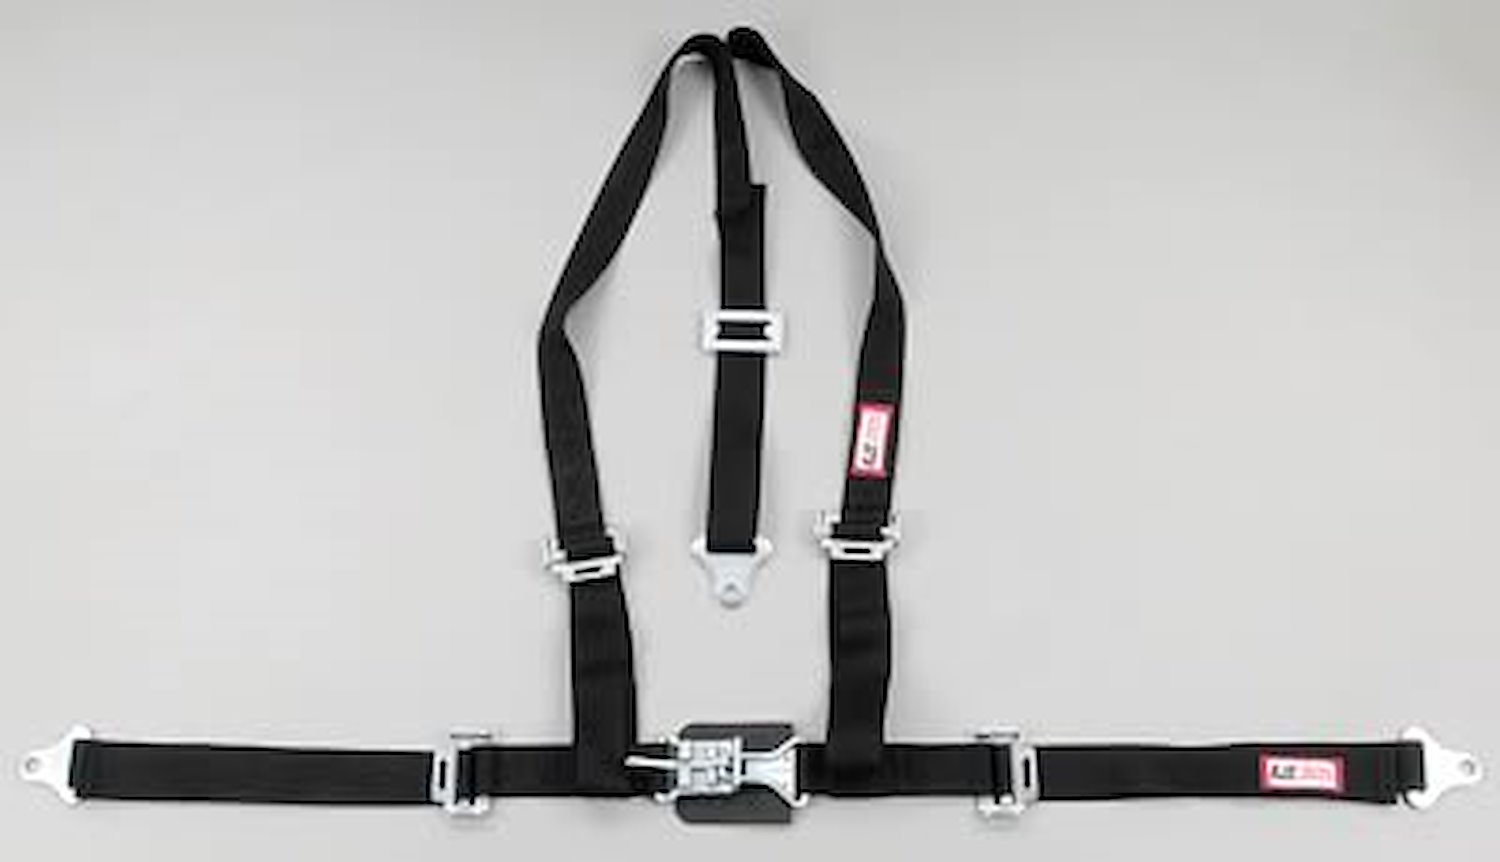 NON-SFI L&L HARNESS 3 PULL UP Lap Belt SEWN IN 2 Shoulder Harness V ROLL BAR Mount ALL WRAP ENDS YELLOW